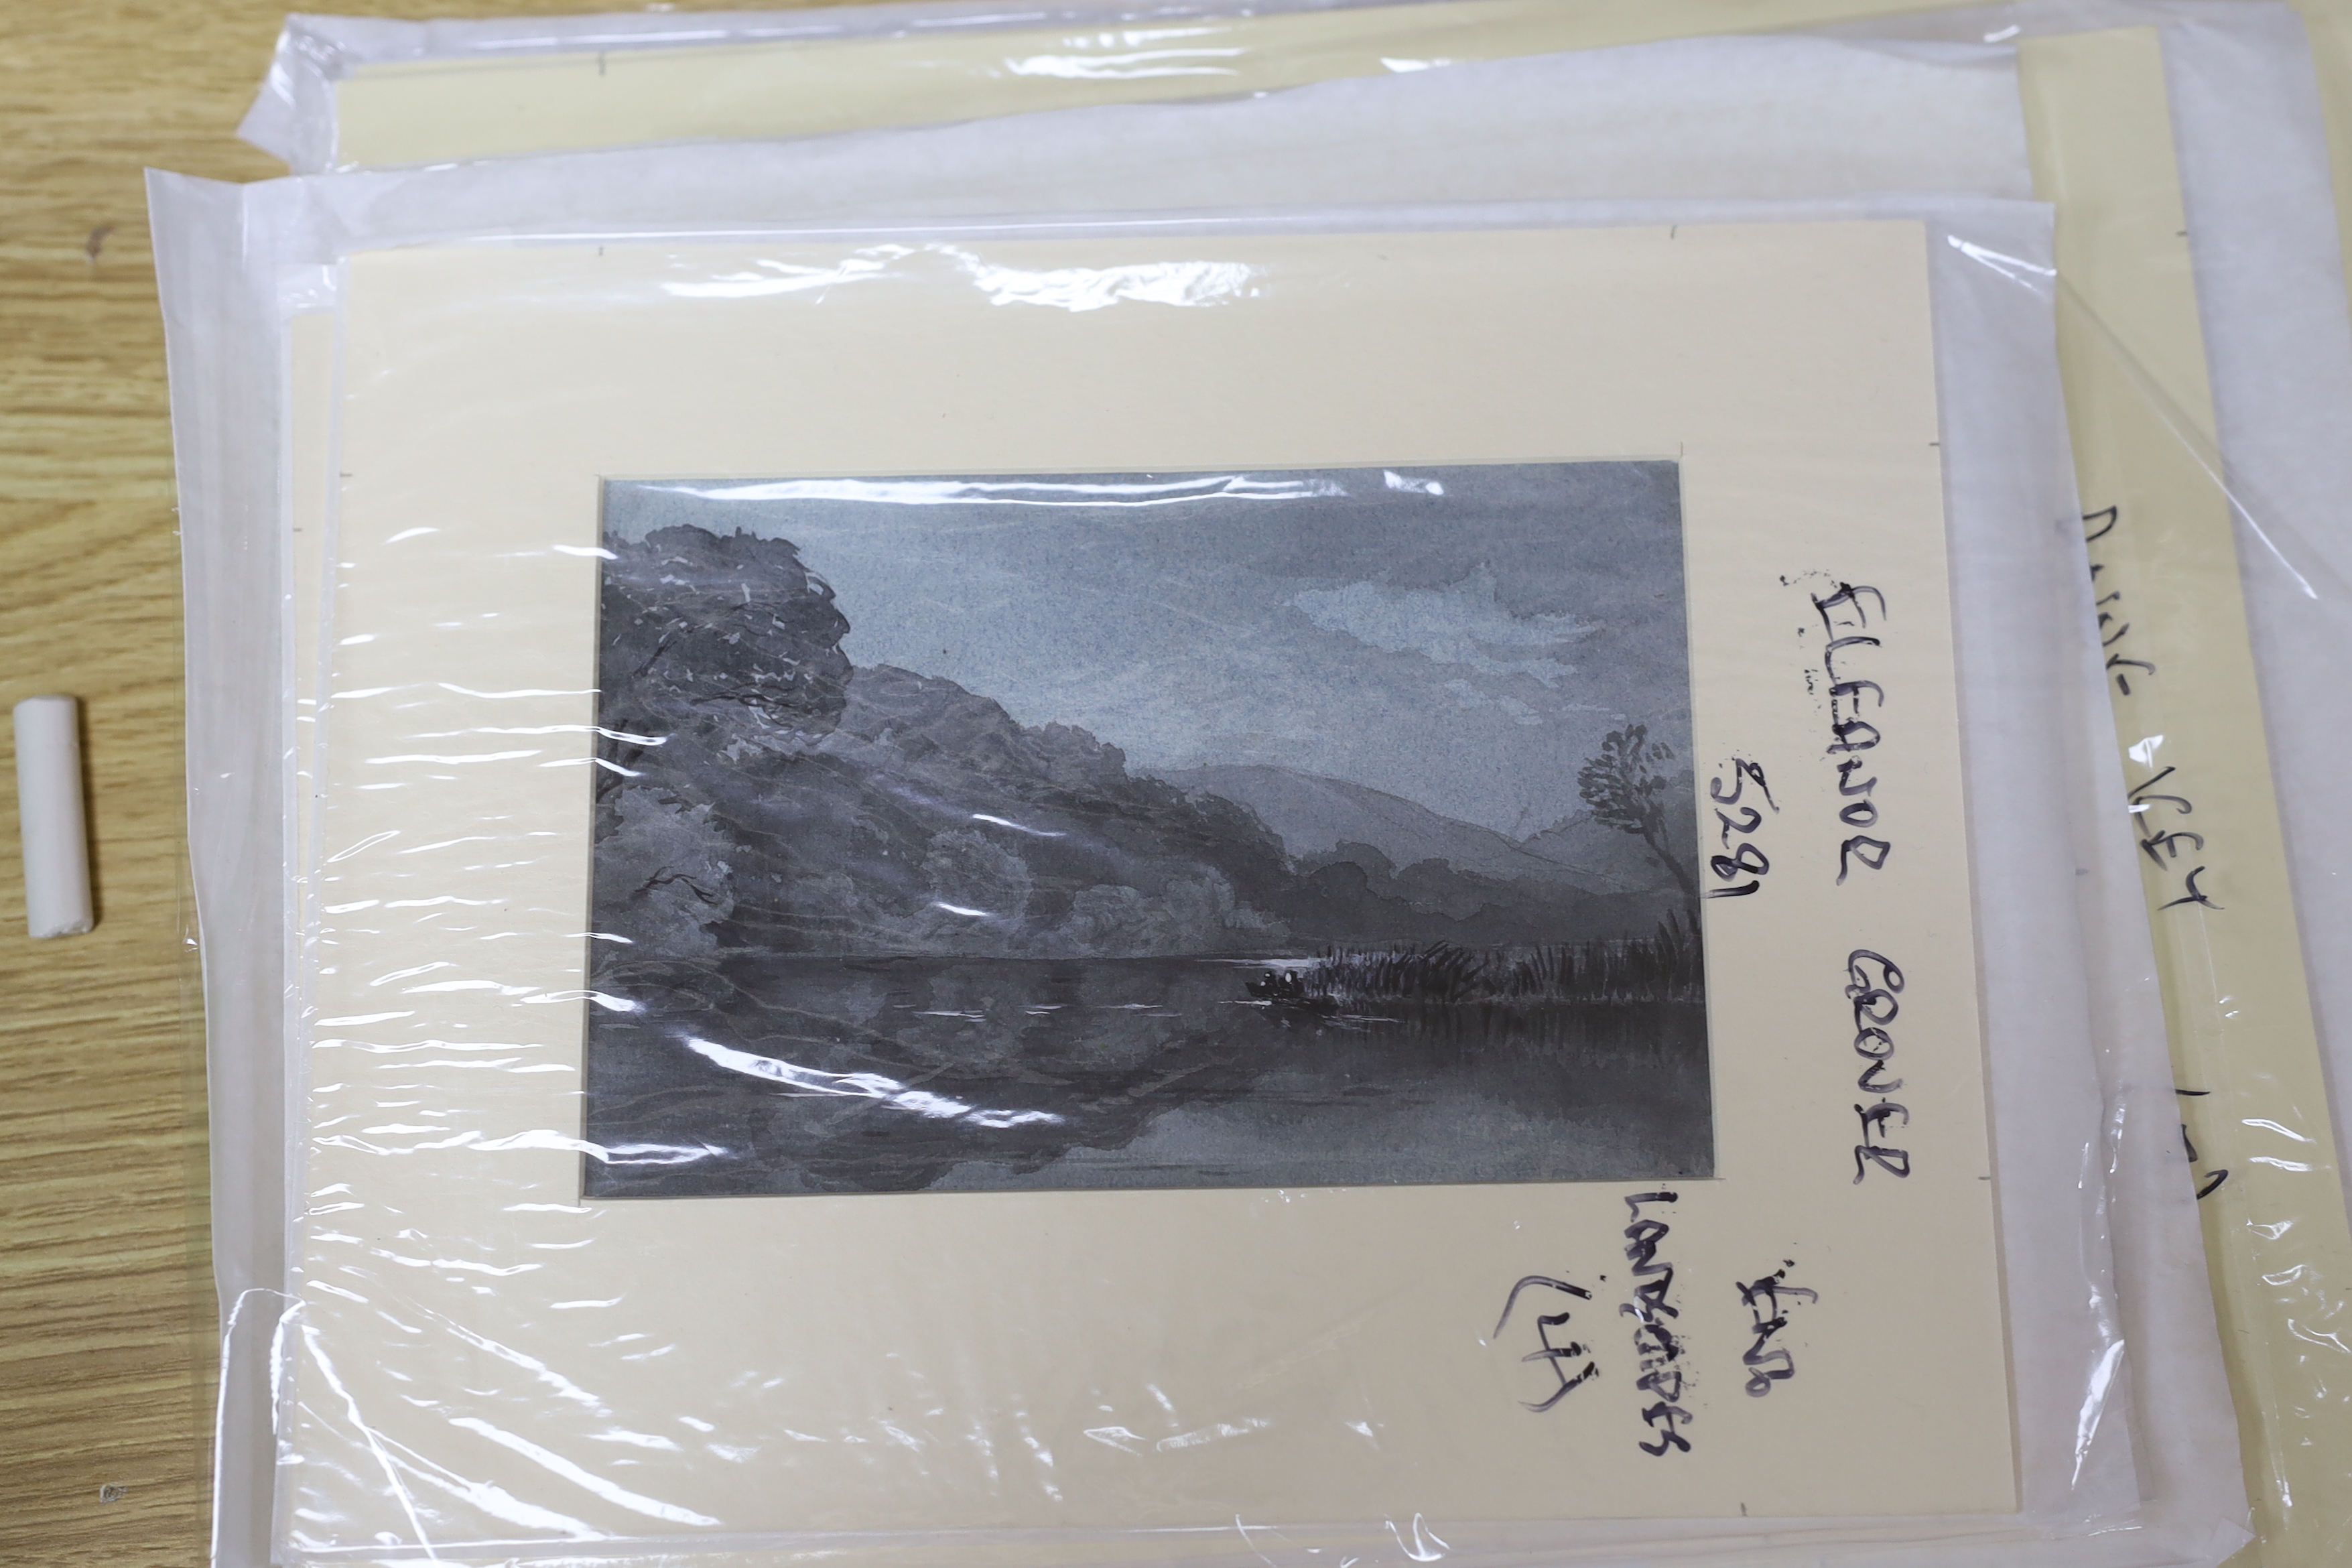 A collection of 19th century watercolours by Anne Key taken from pages of an album, including landscapes, together with four monochrome landscapes by Eleanor Grover and a sketchbook by Eleanor Wilson, Welsh views, larges